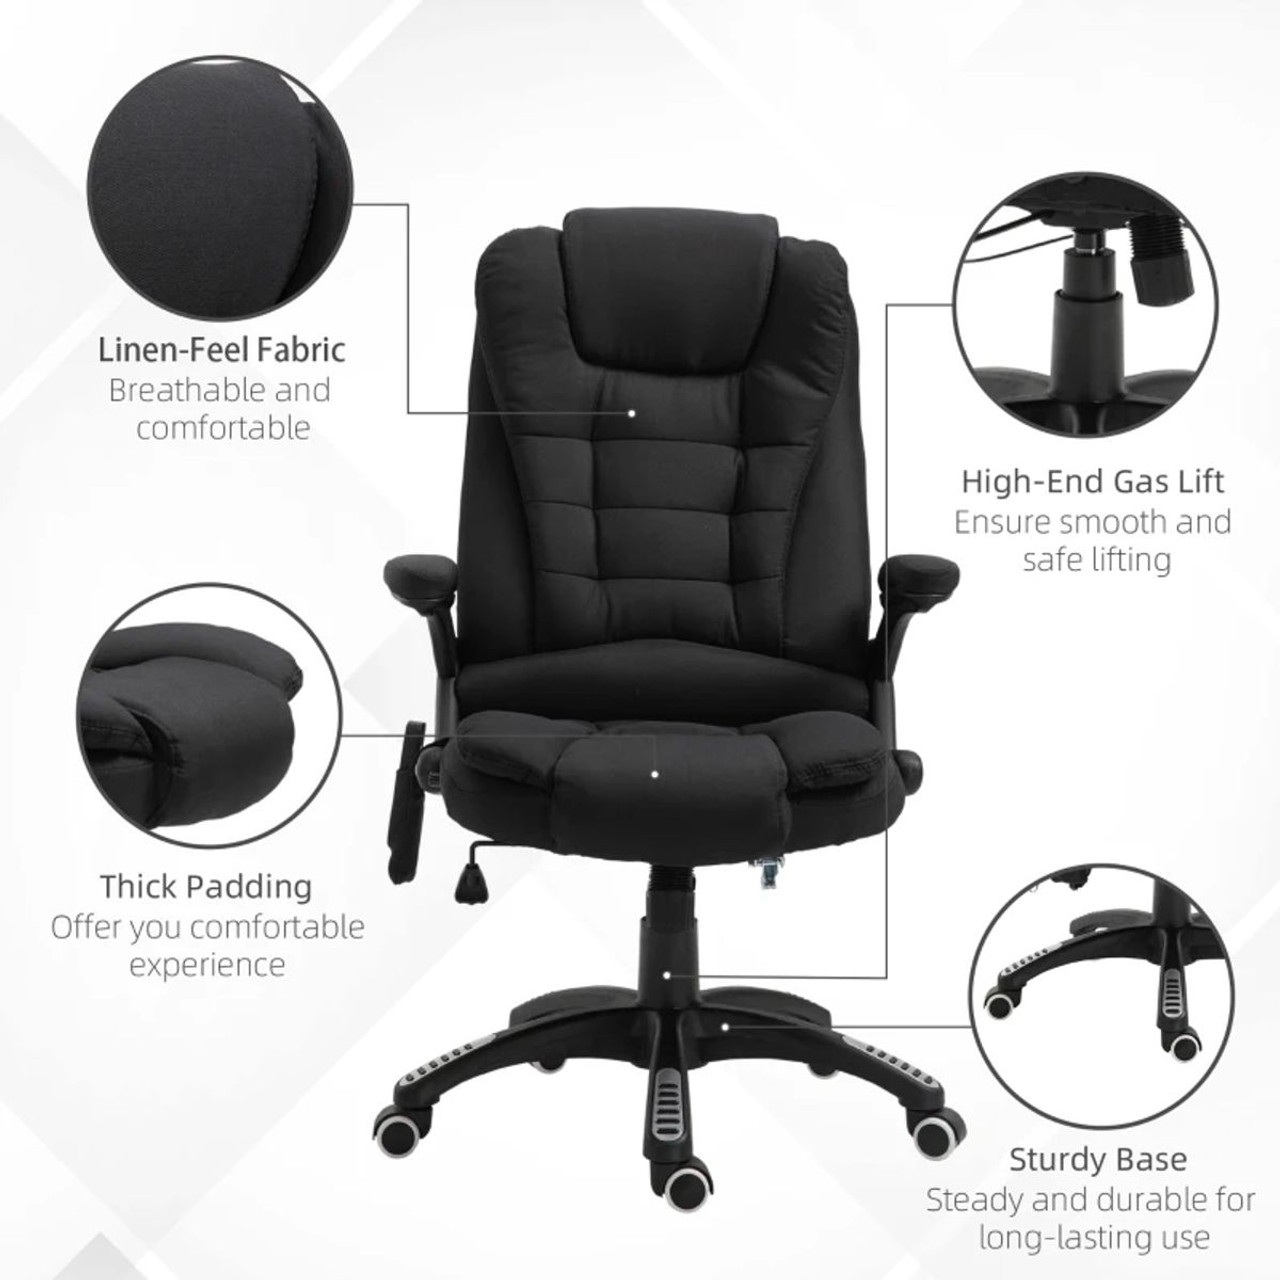 6 Vibrating Massage Office Chair by Vinsetto™ product image